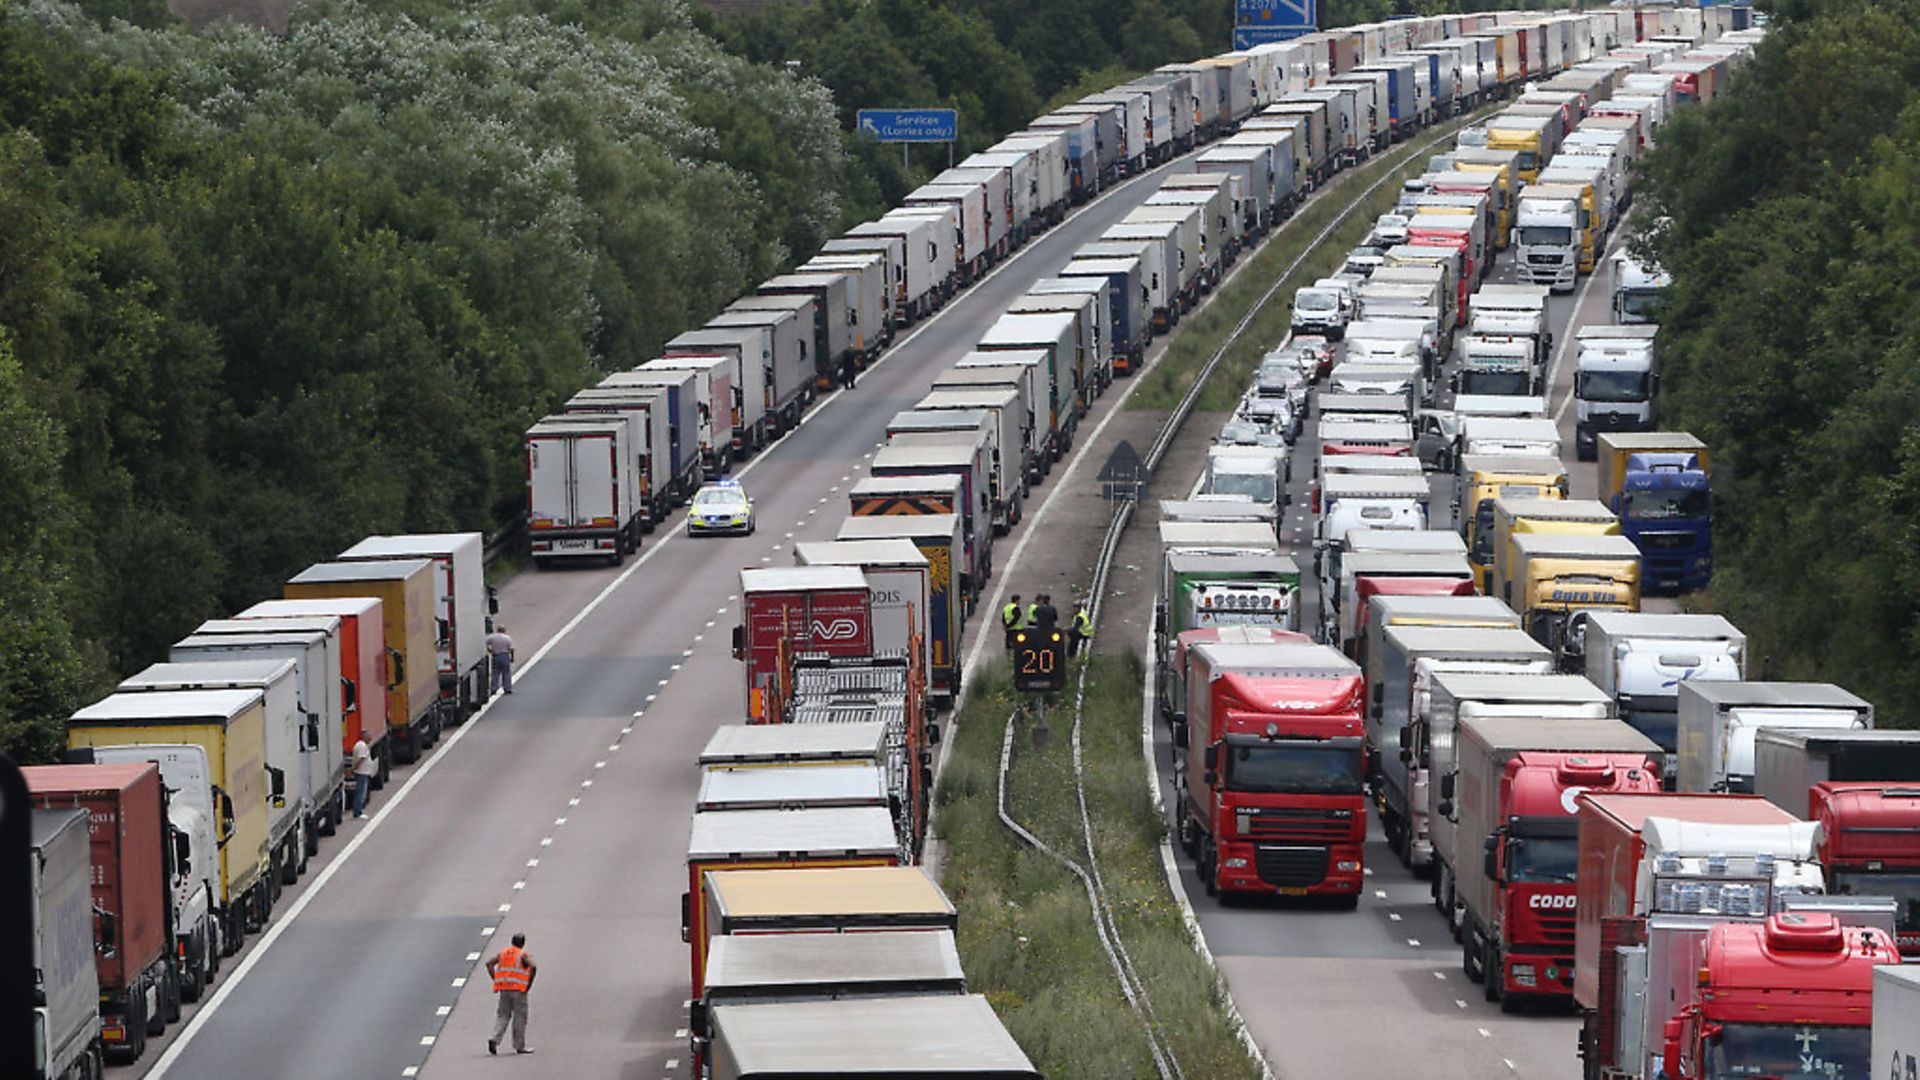 Trucks line up on the M20.  (Photo by Peter Macdiarmid/Getty Images) - Credit: Getty Images